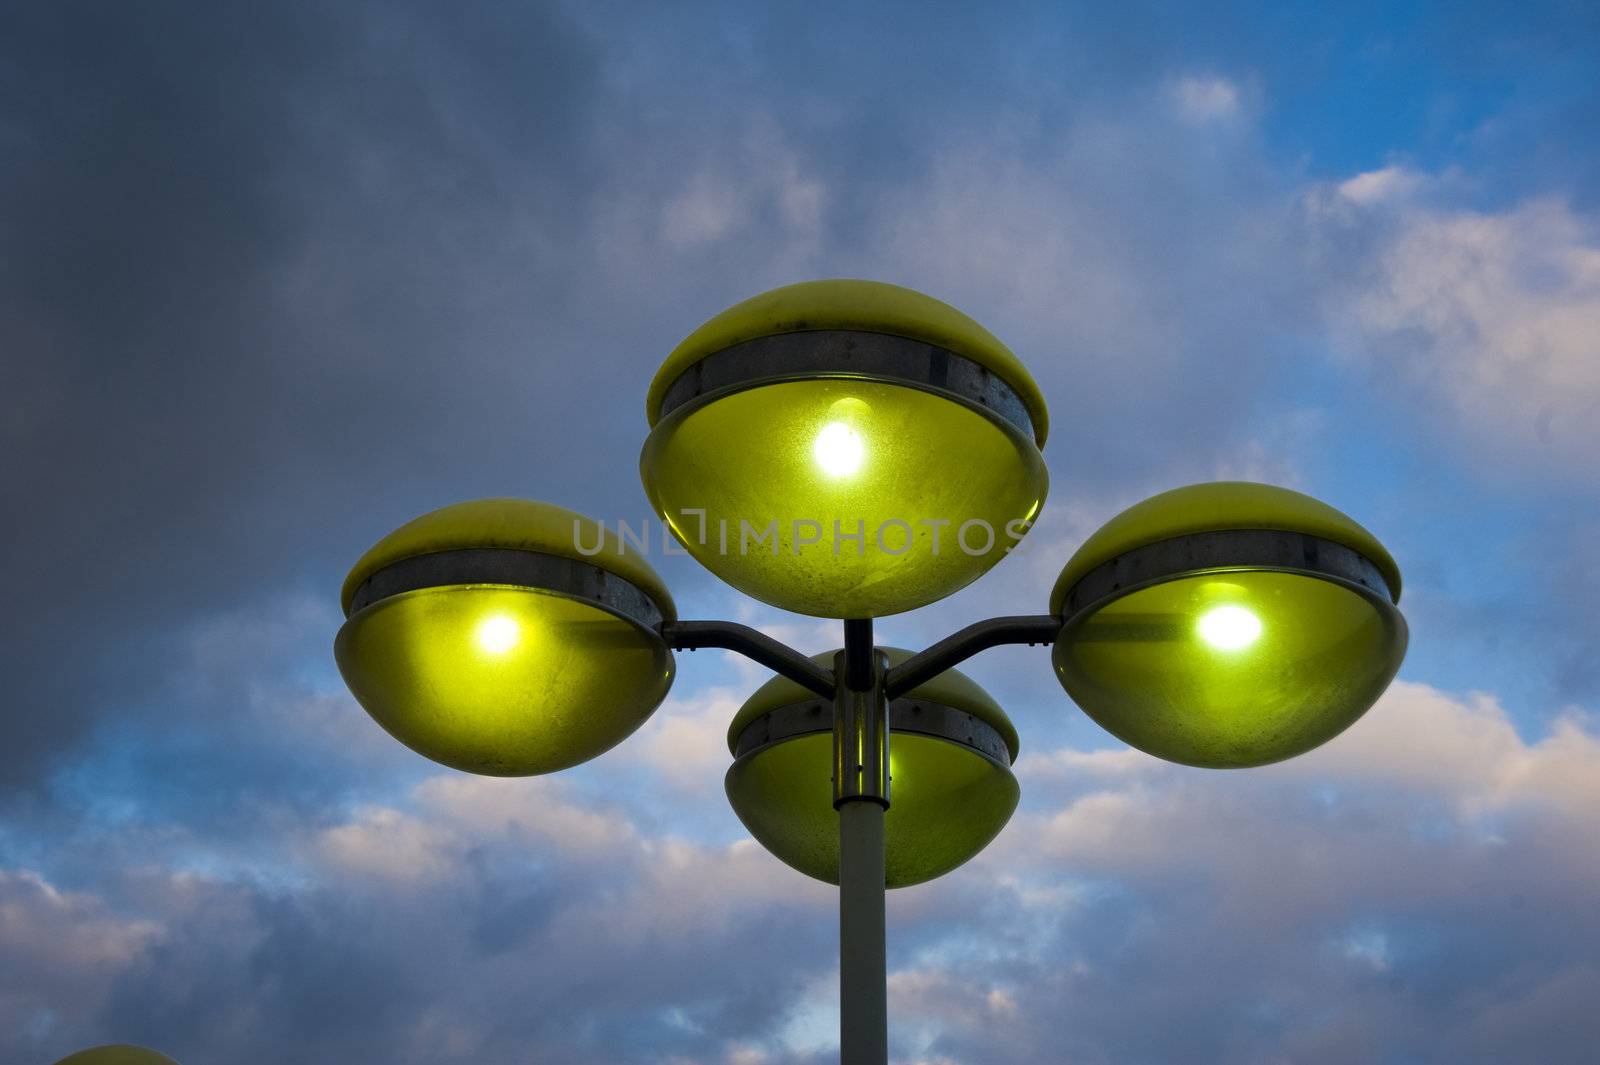 Lamp post by Alenmax